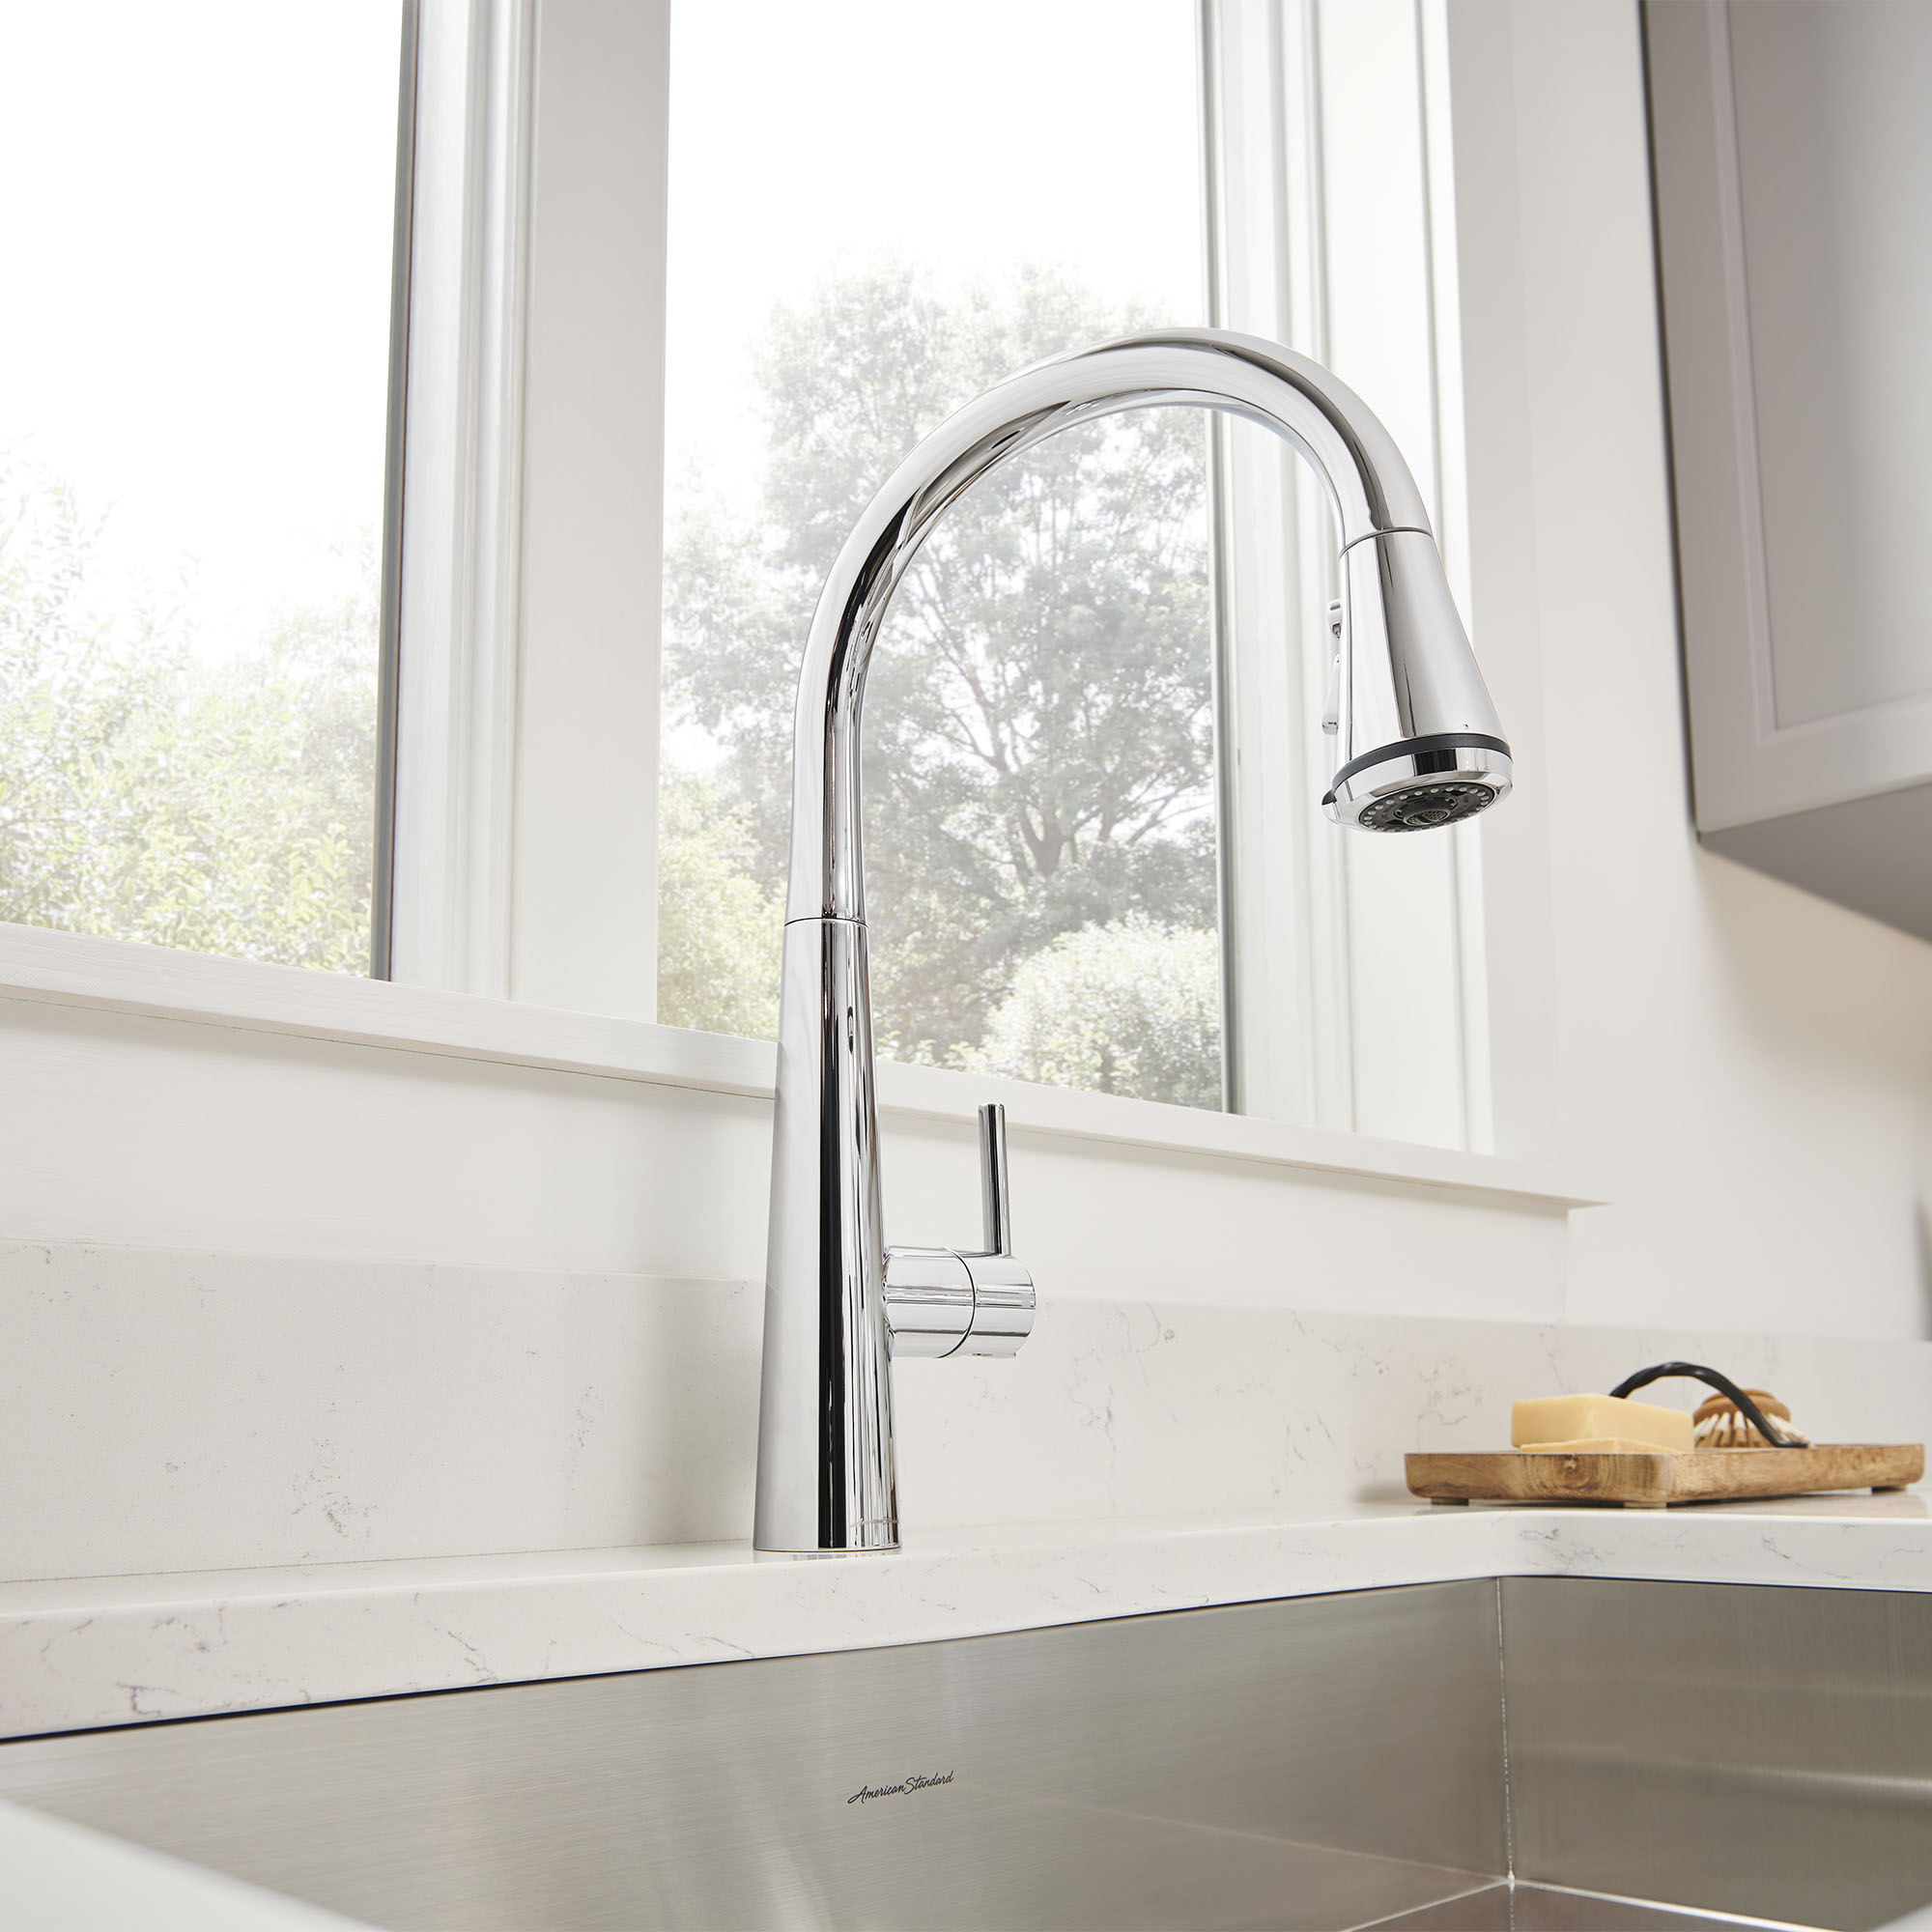 Edgewater™ Single-Handle Pull-Down Multi Spray Kitchen Faucet 1.8 gpm/6.8 L/min